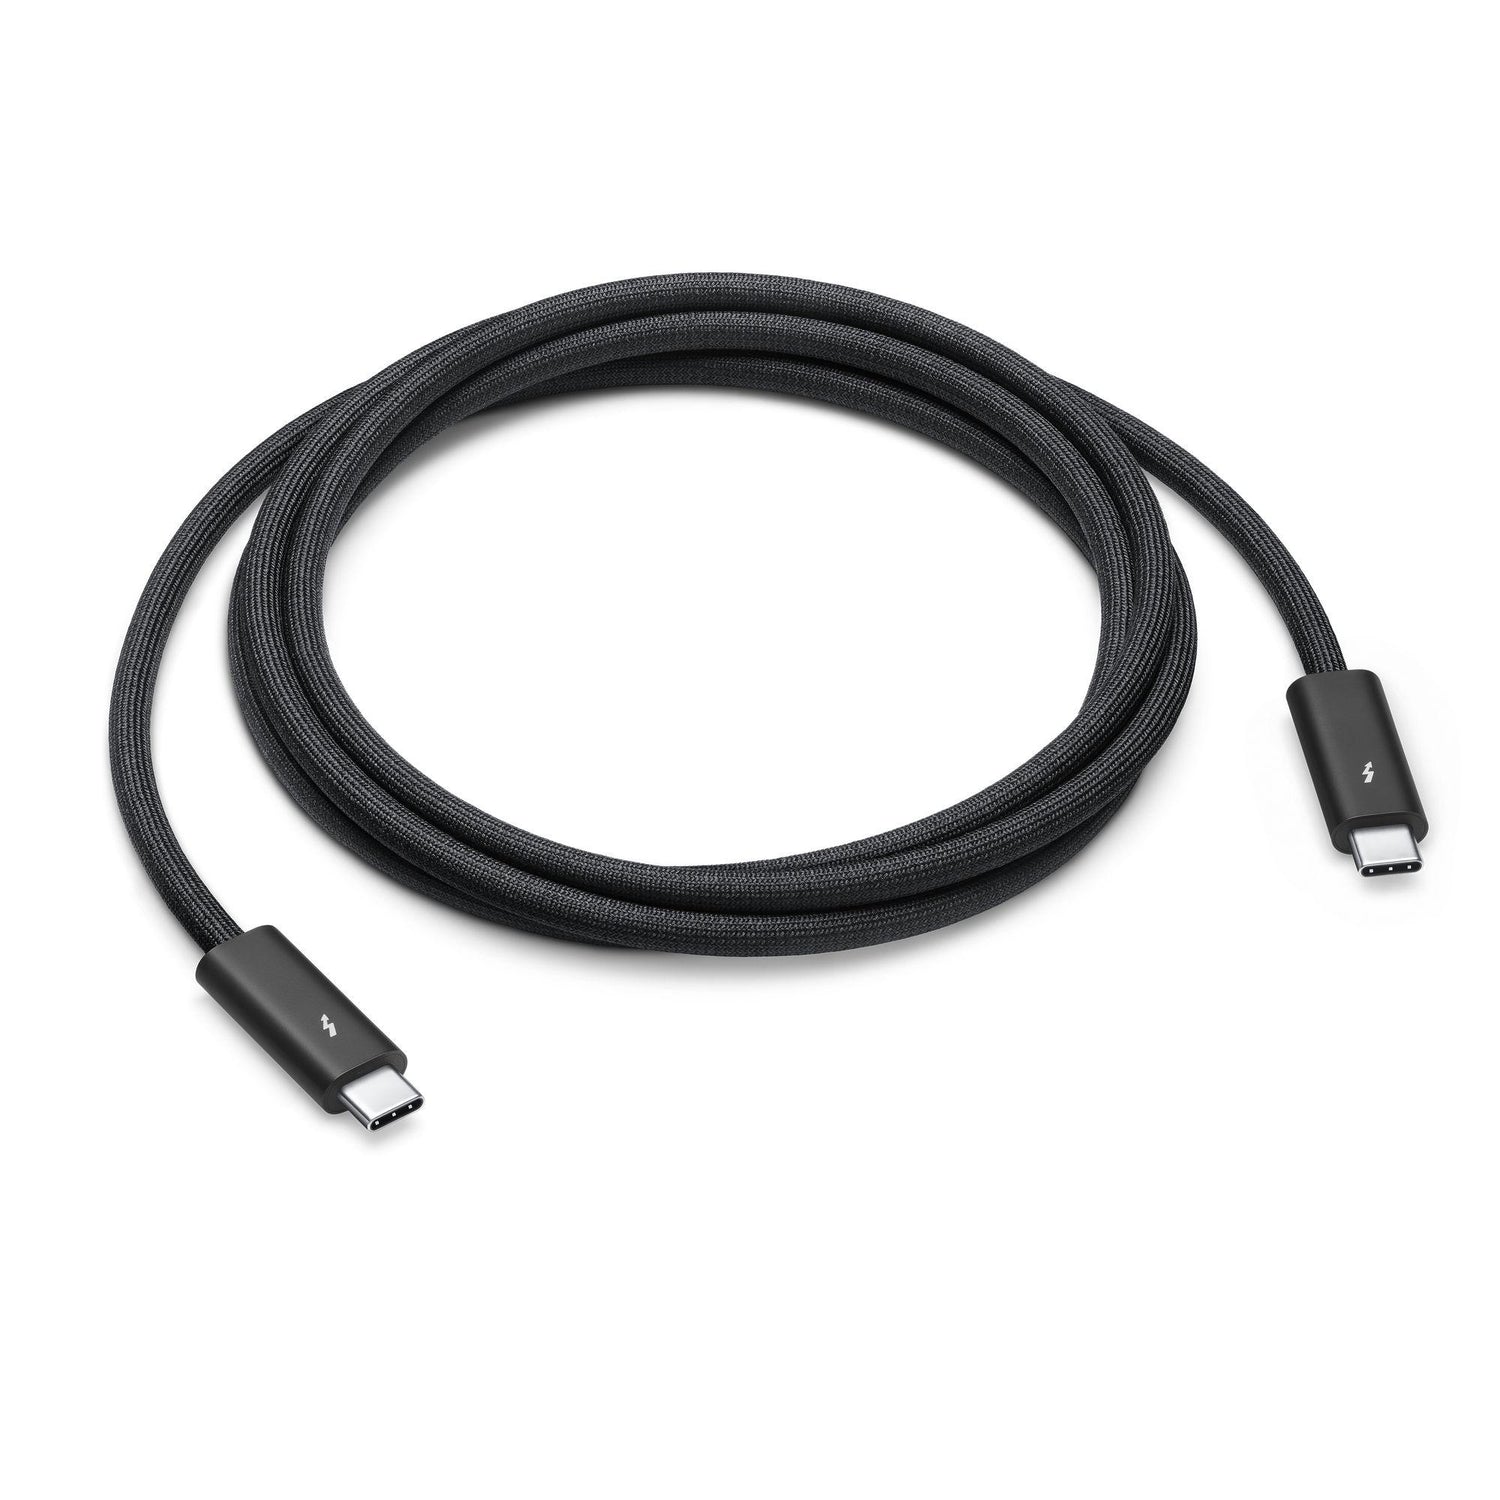 apl_ps_Thunderbolt 4 Pro Cable (1.8m)